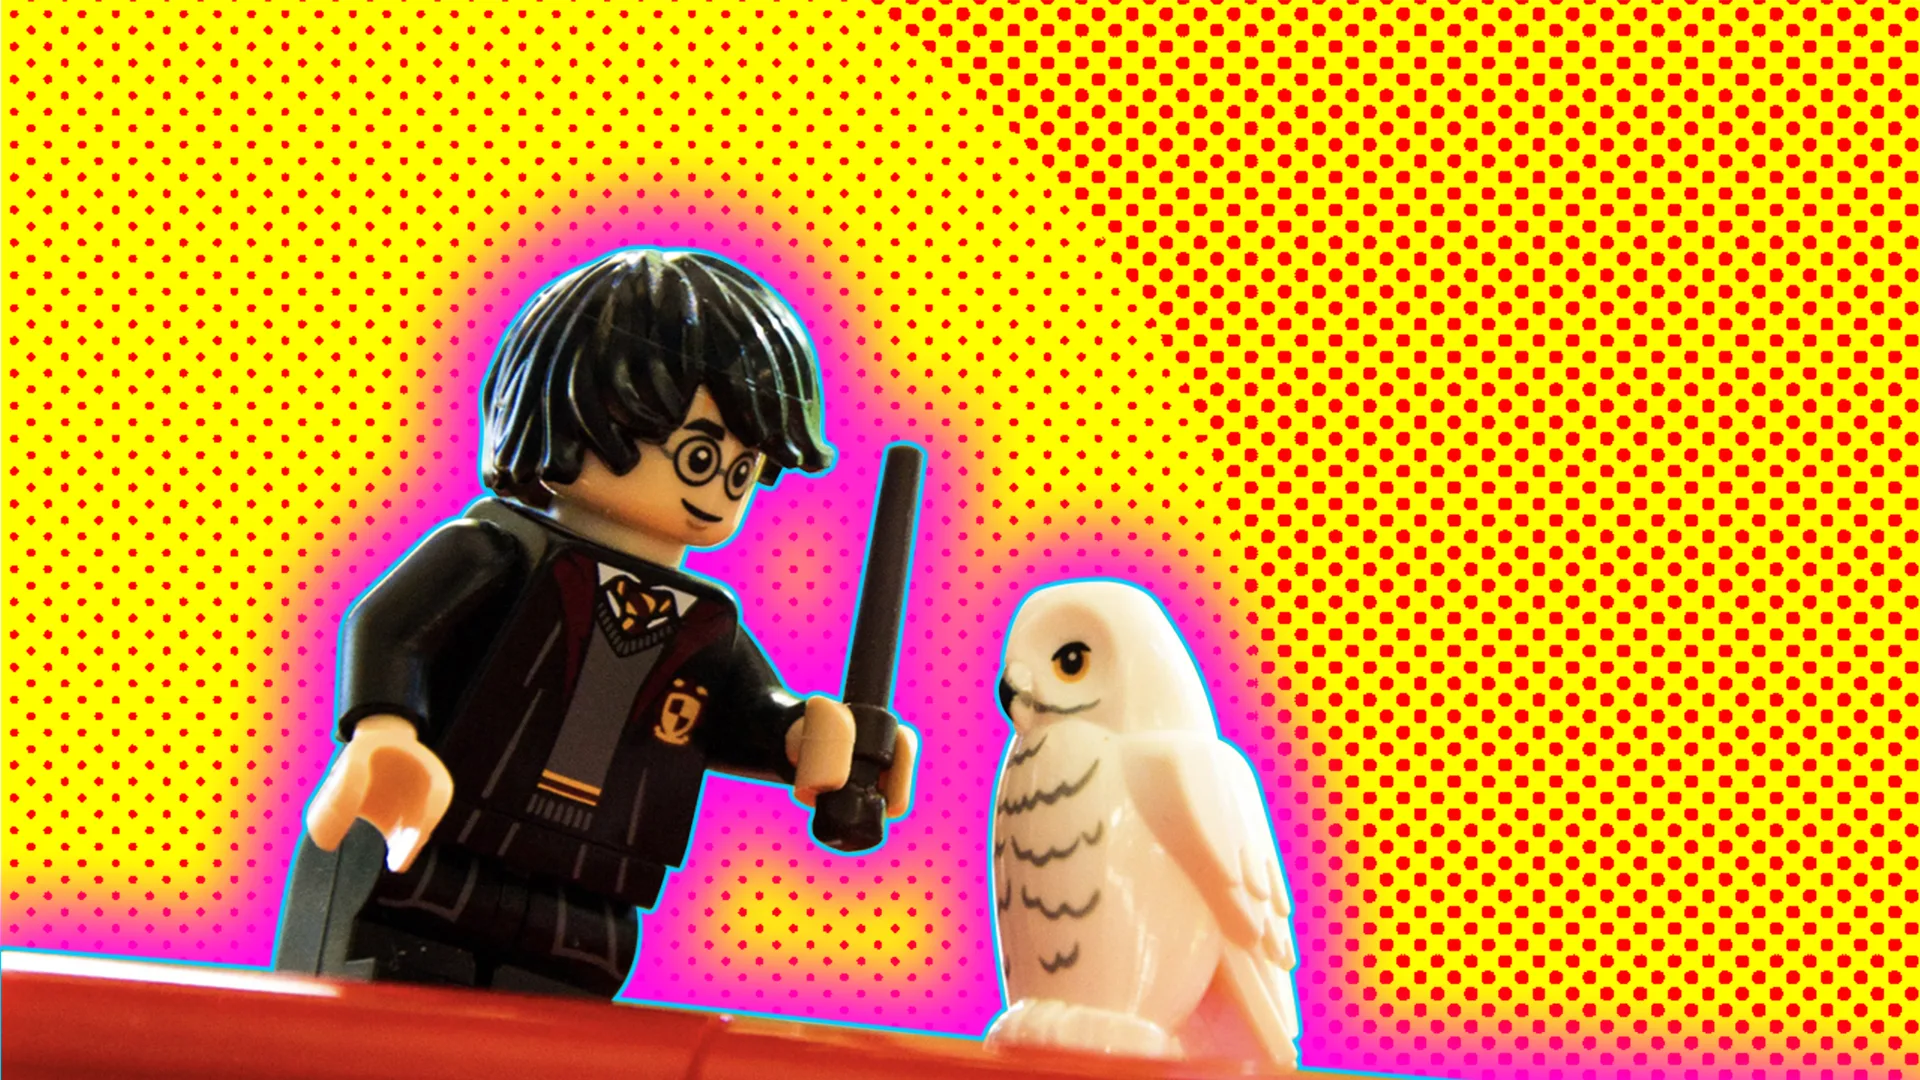 Lego Harry Potter & Hedwig the owl with a polkadot background and a glow around the image